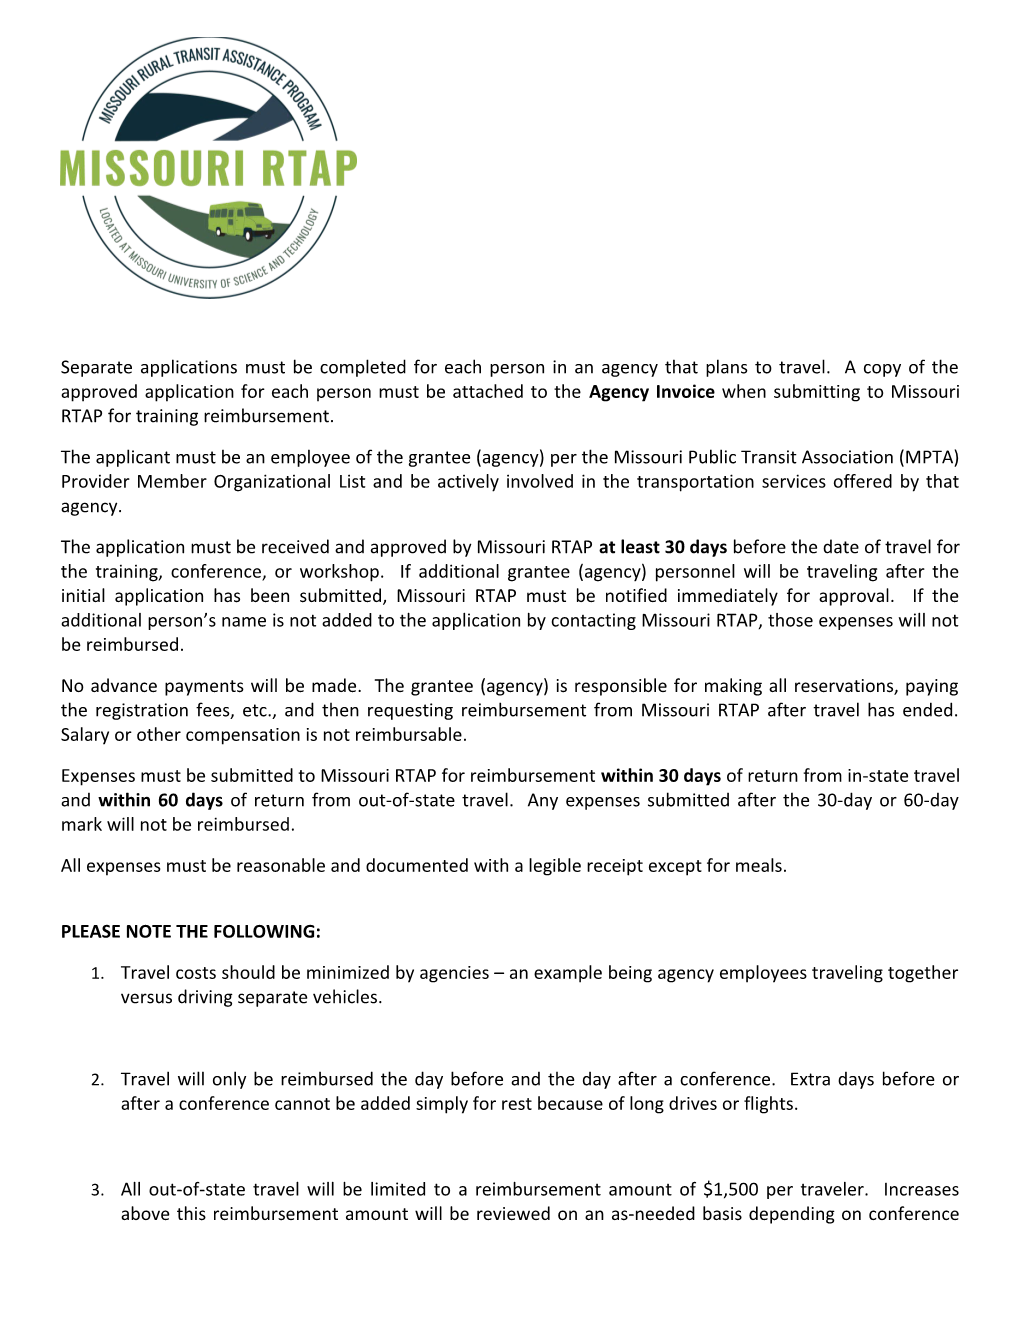 The Applicant Must Be an Employee of the Grantee (Agency) Per the Missouri Public Transit